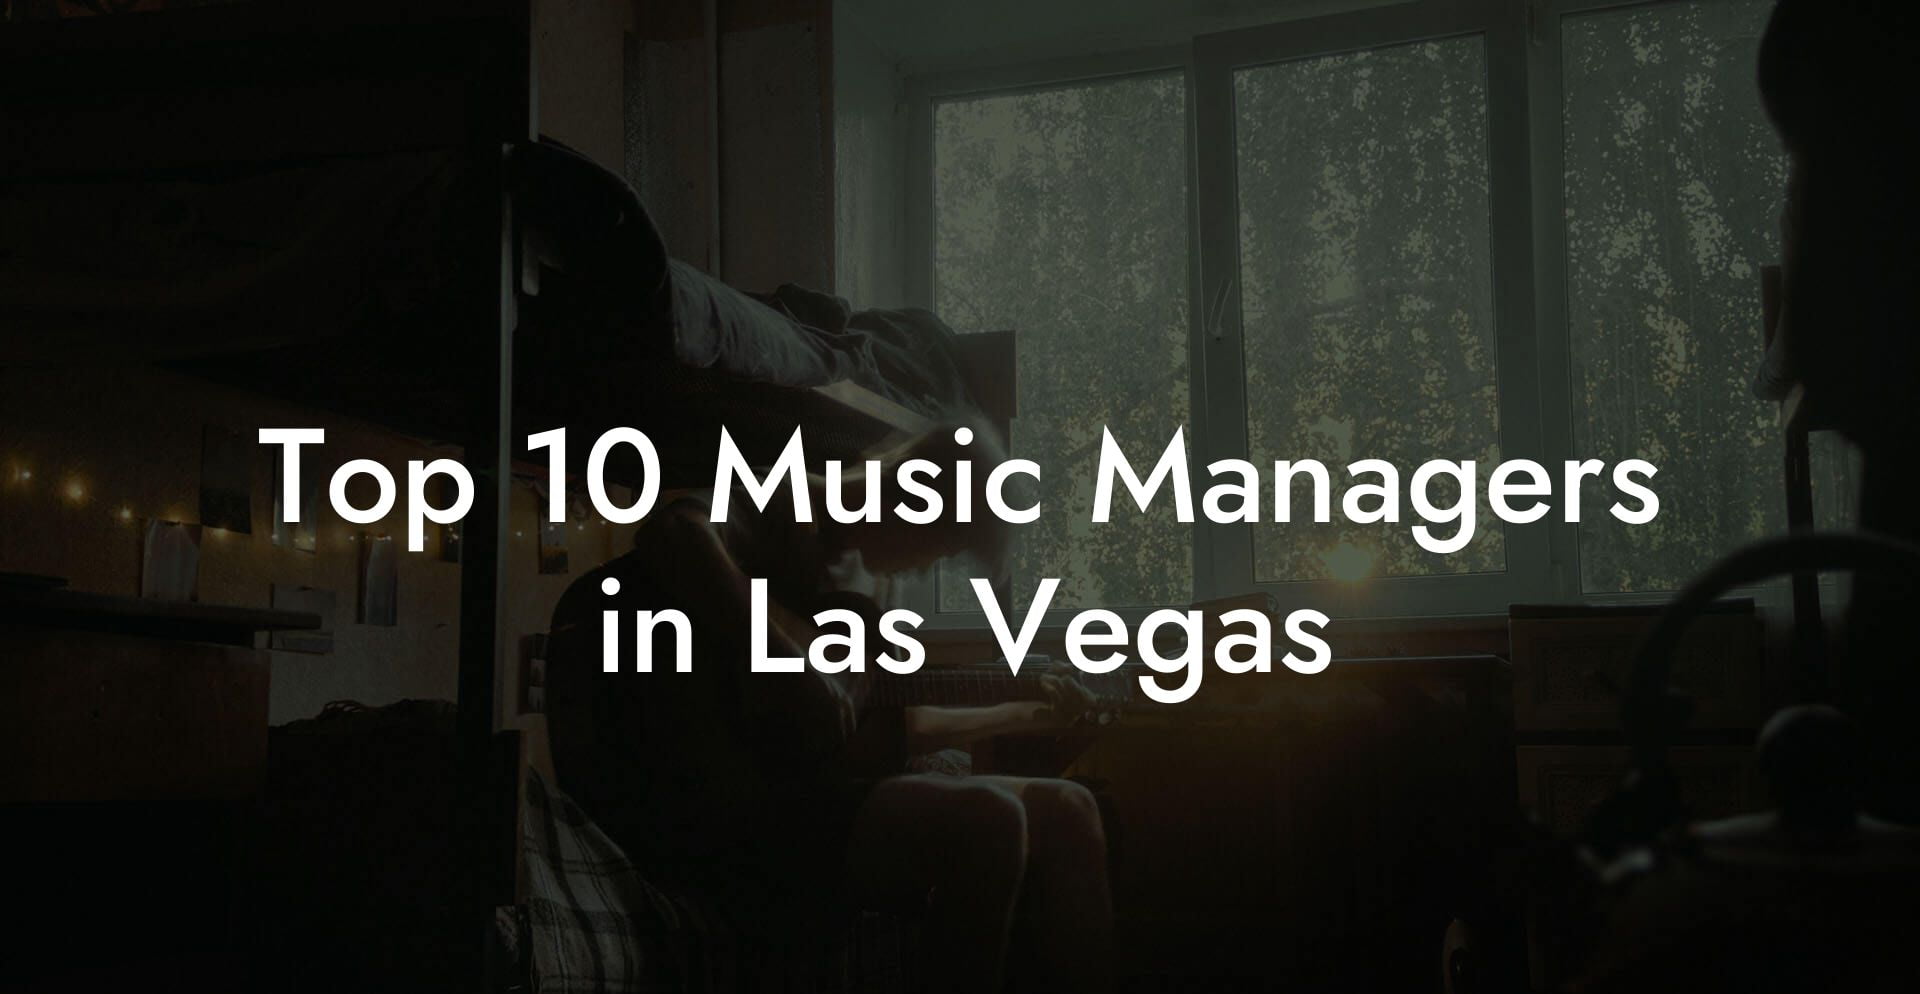 Top 10 Music Managers in Las Vegas